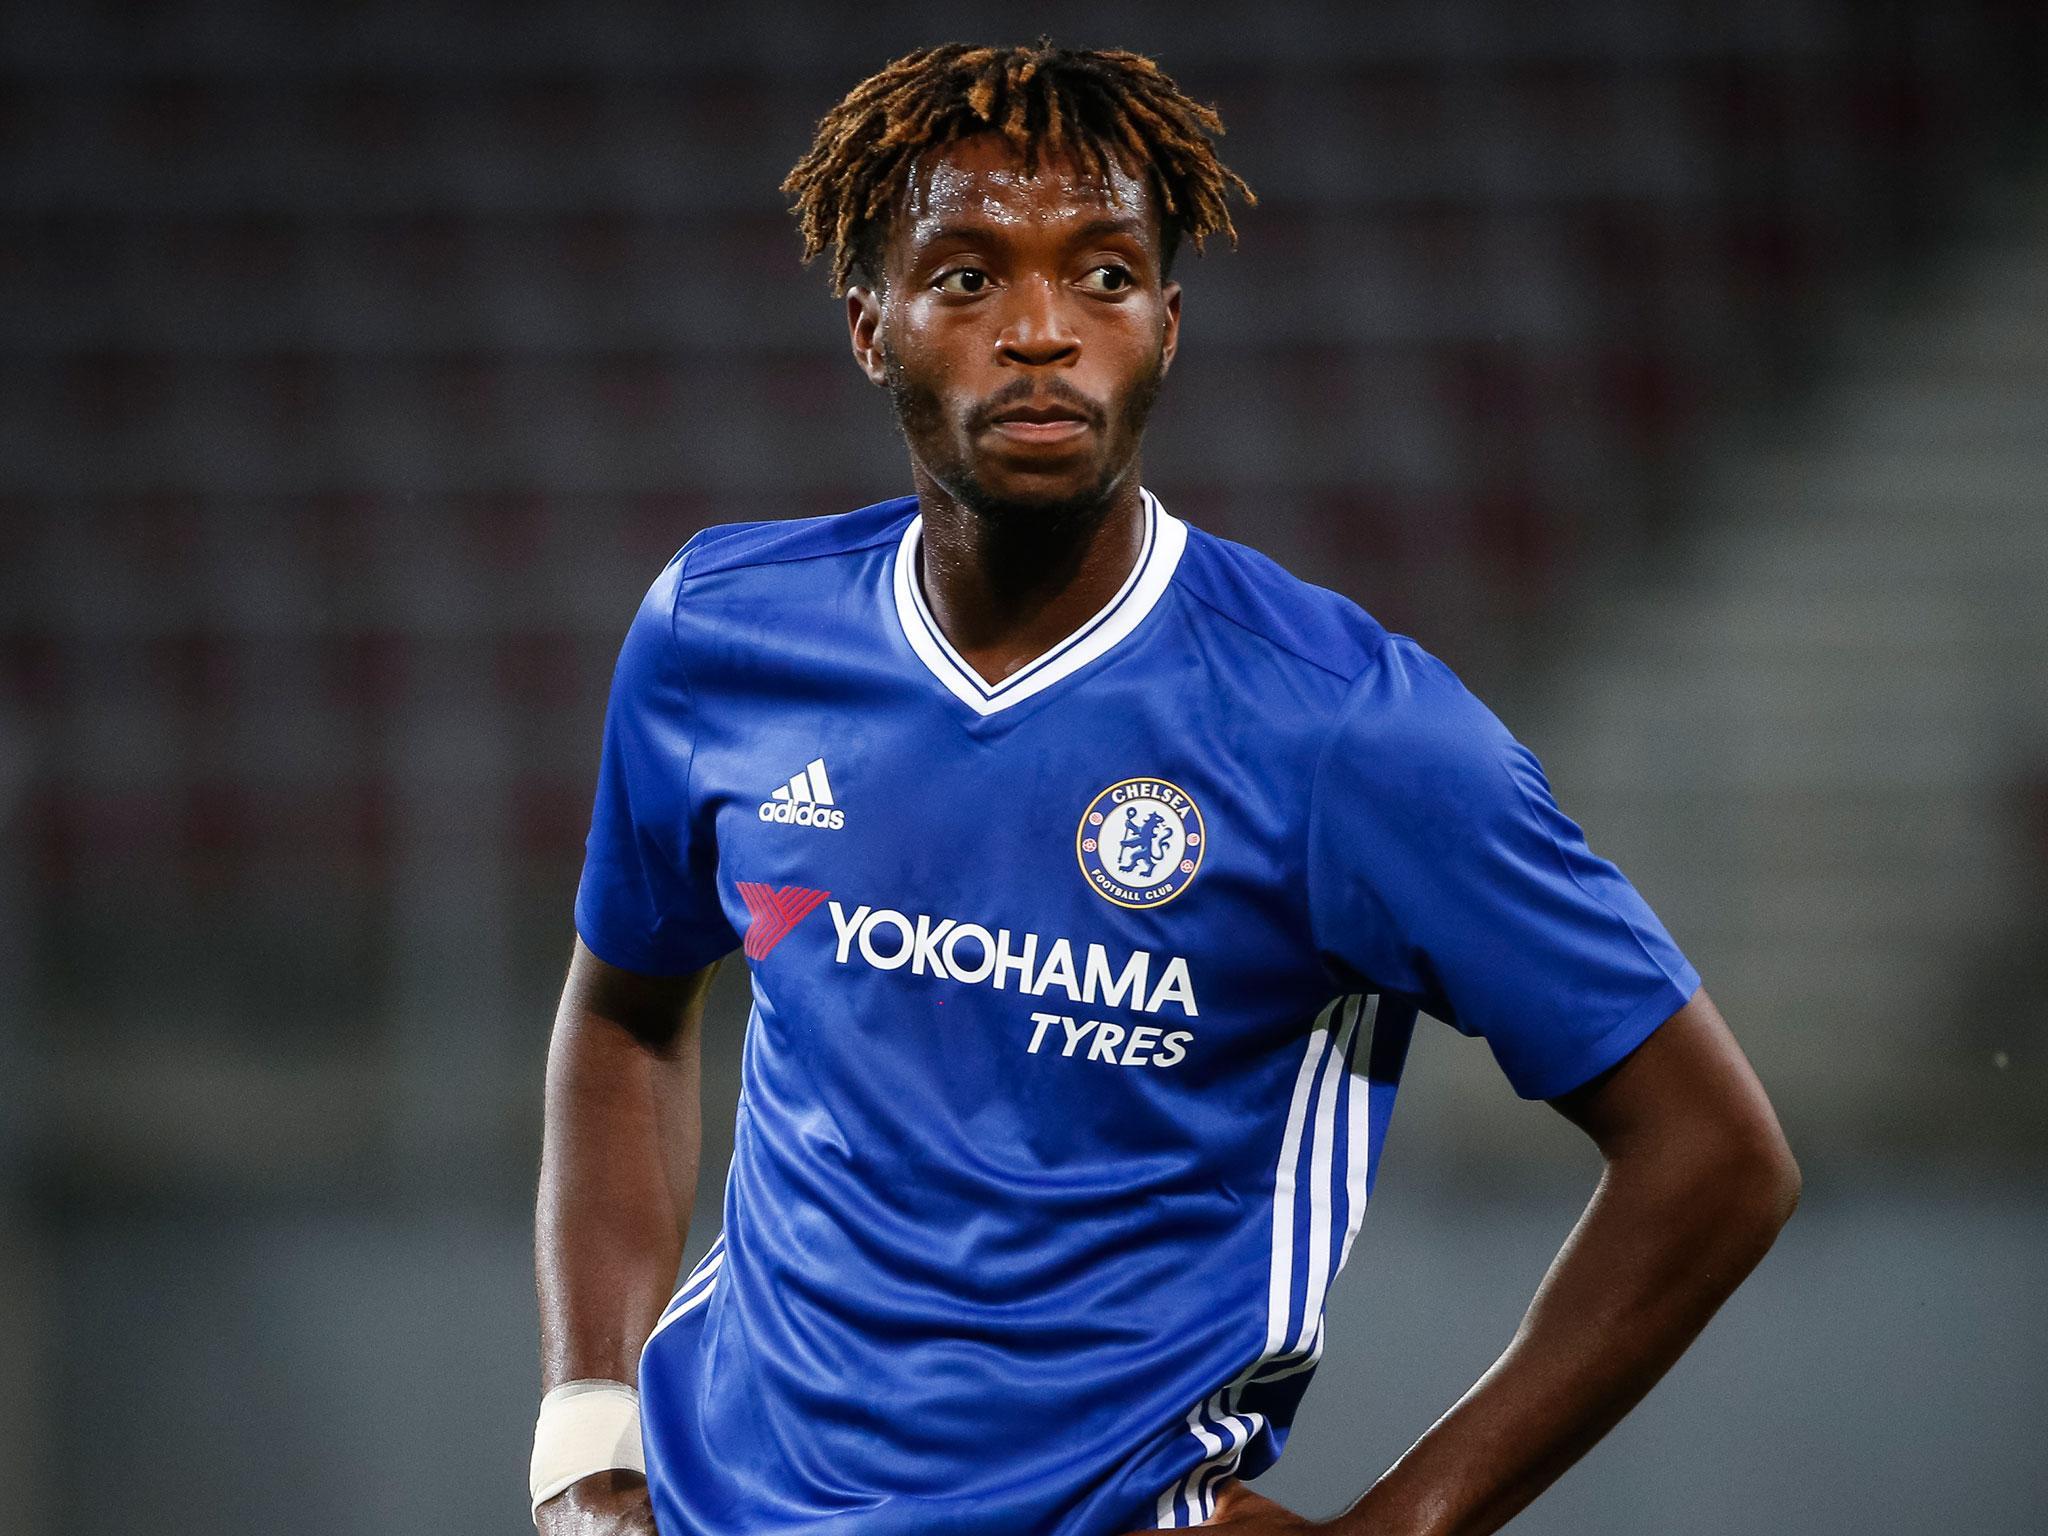 Nathaniel Chalobah left Chelsea to gain more first-team opportunities